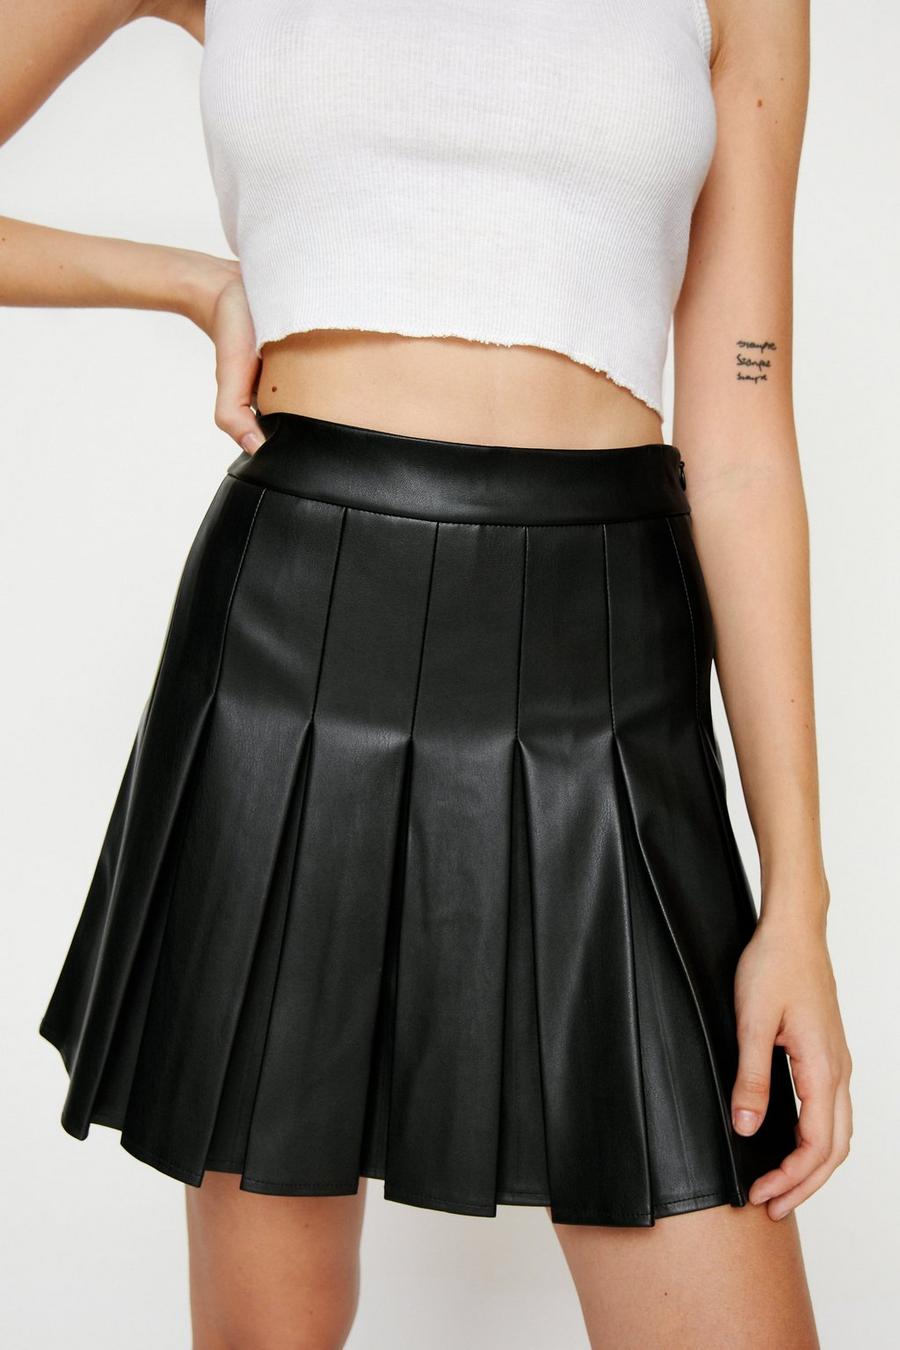 Petite Clothing | Stylist Outfits for Petite Women | Nasty Gal